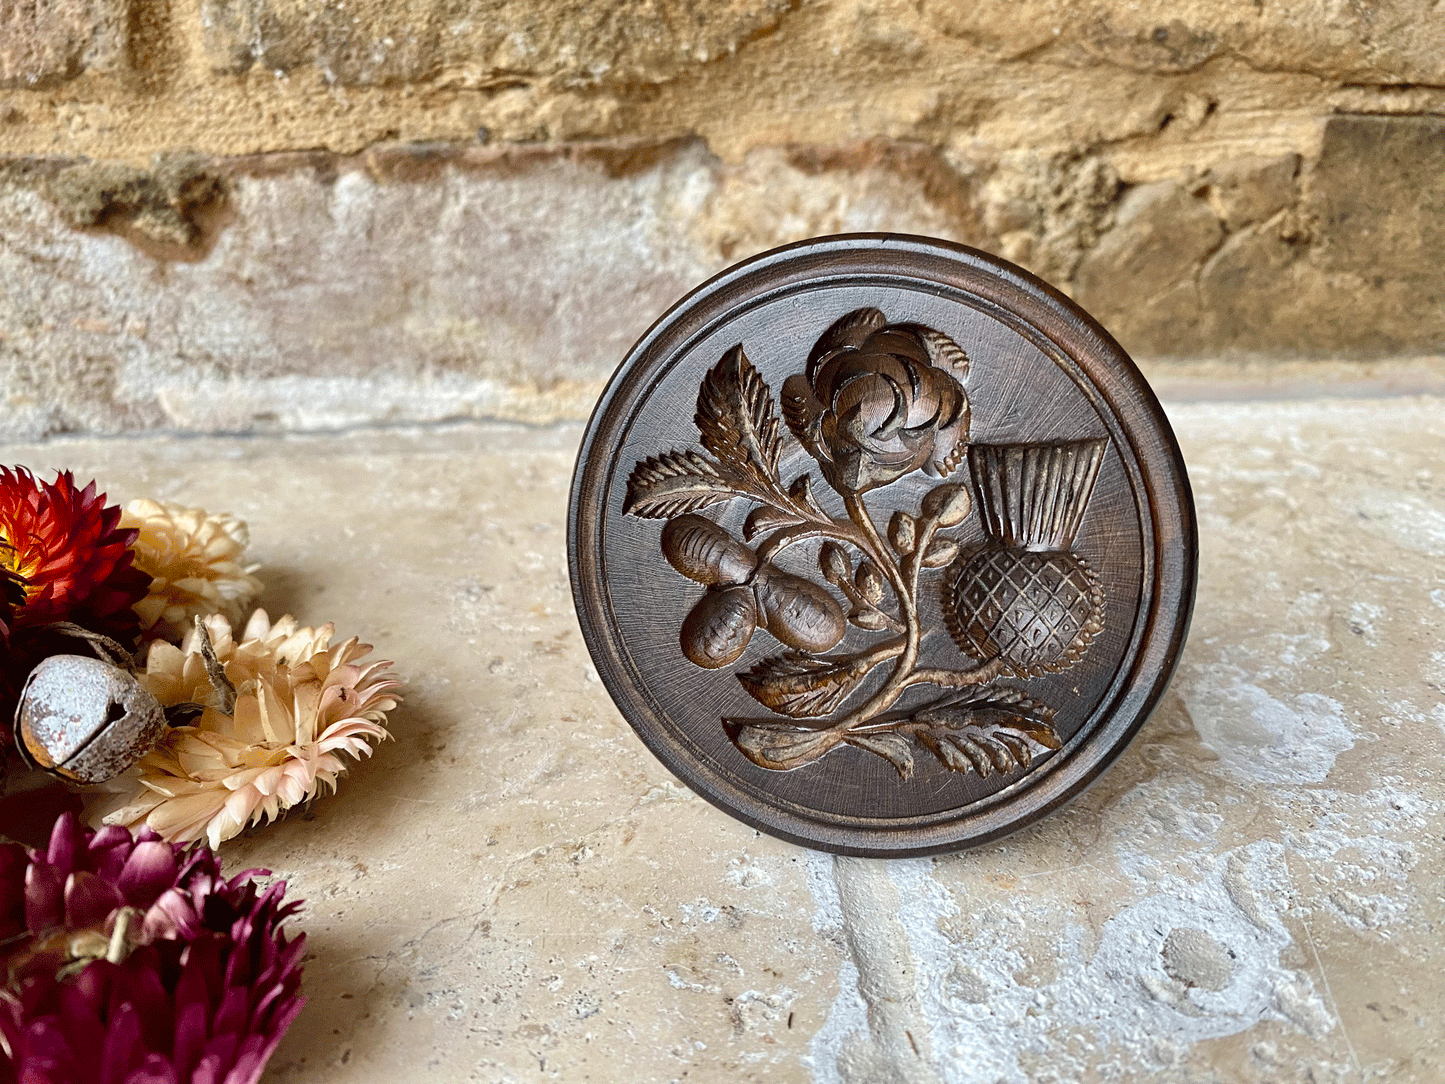 rare antique victorian english carved butter biscuit stamp marriage union gift english rose scottish thistle irish clover